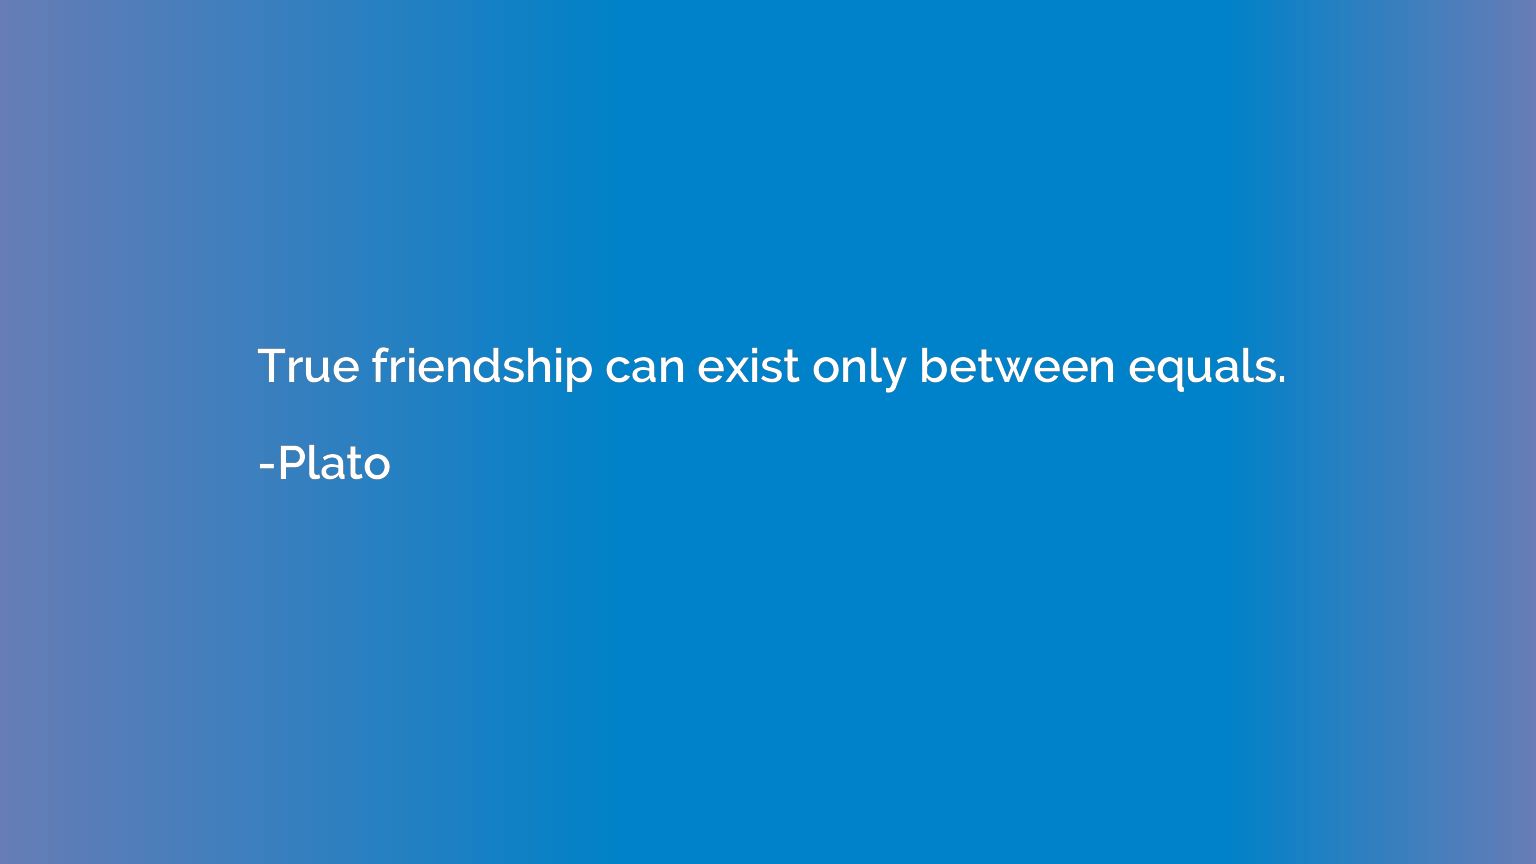 True friendship can exist only between equals.